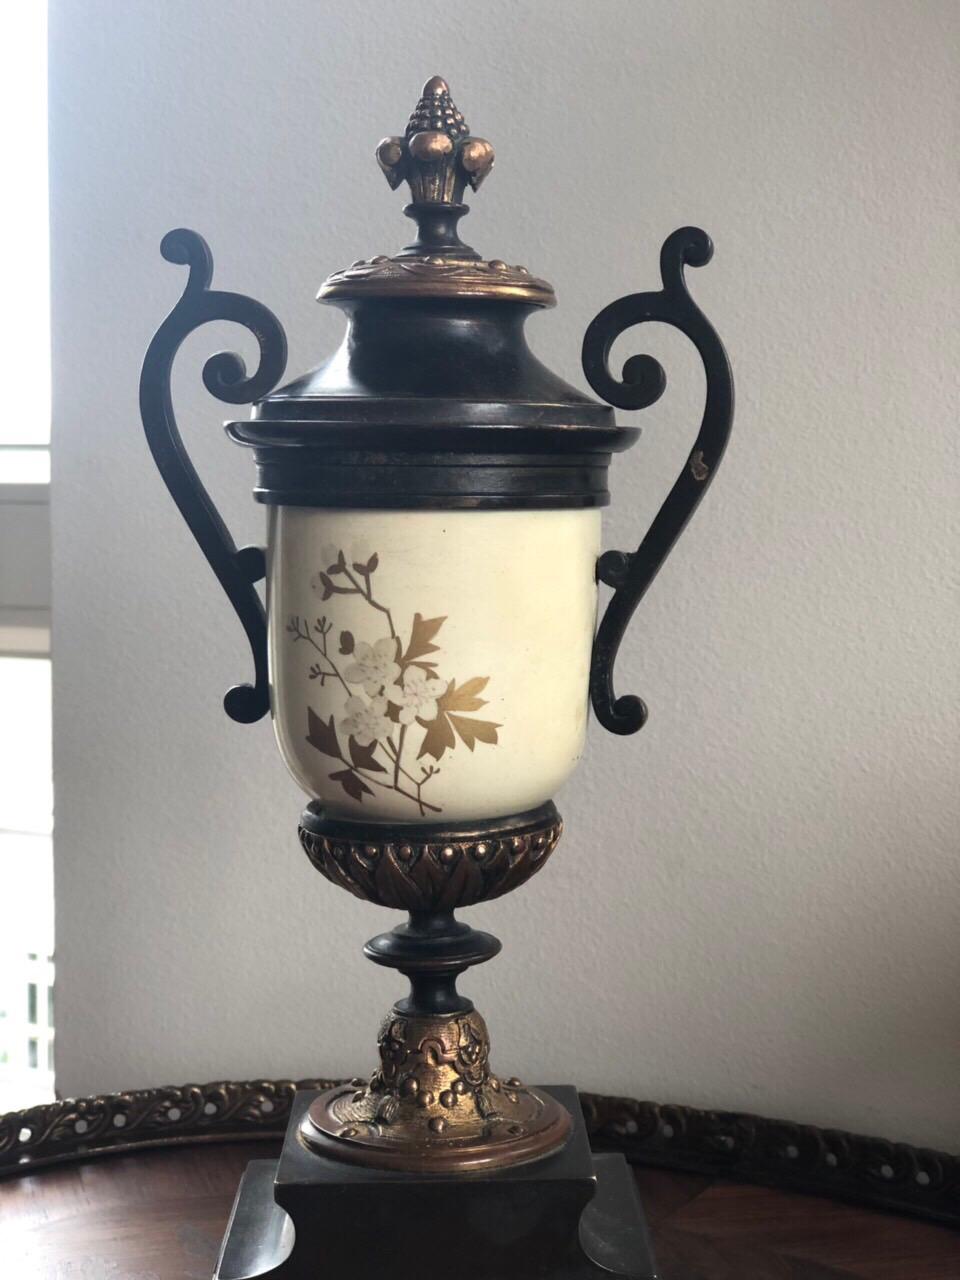 Limited edition, numbered on the bottom. Authentic item.

History of the Urn / Origin
The first cremations already occurred in 3000 B.C., which means that incinerations are among the oldest traditional forms of burial. In many ancient cultures, the